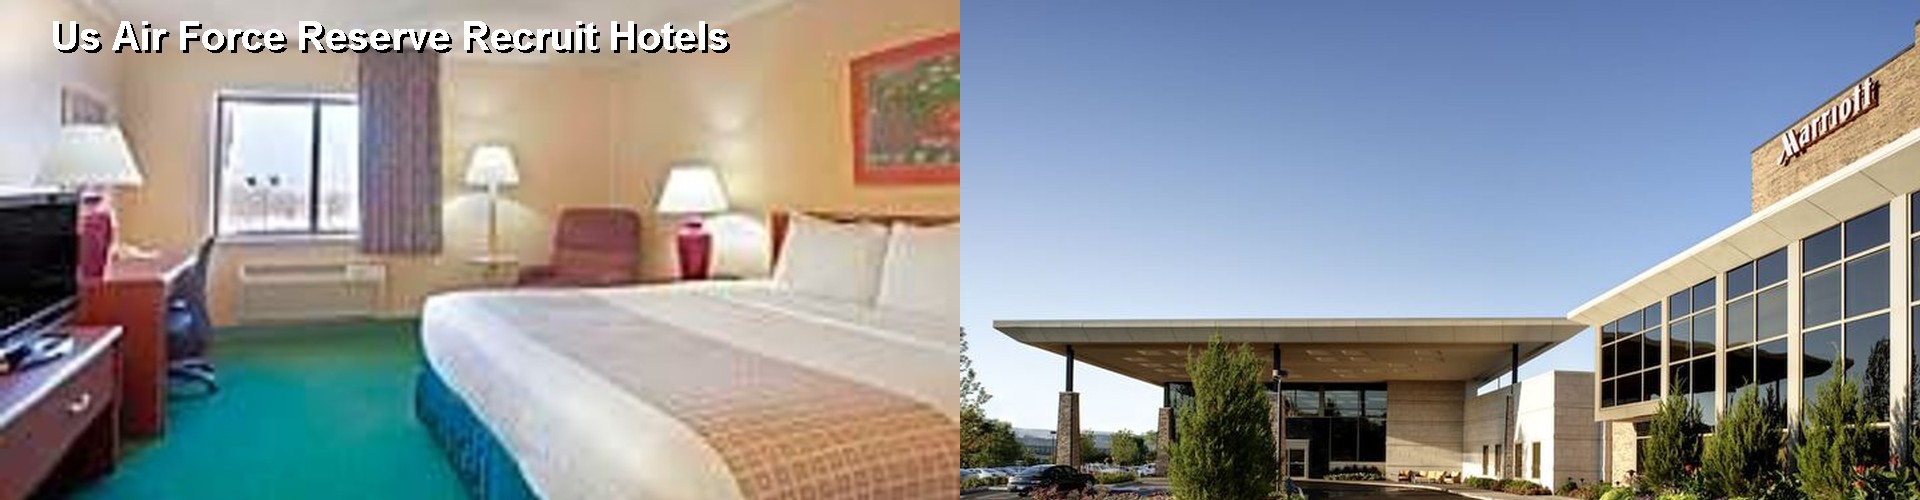 5 Best Hotels near Us Air Force Reserve Recruit